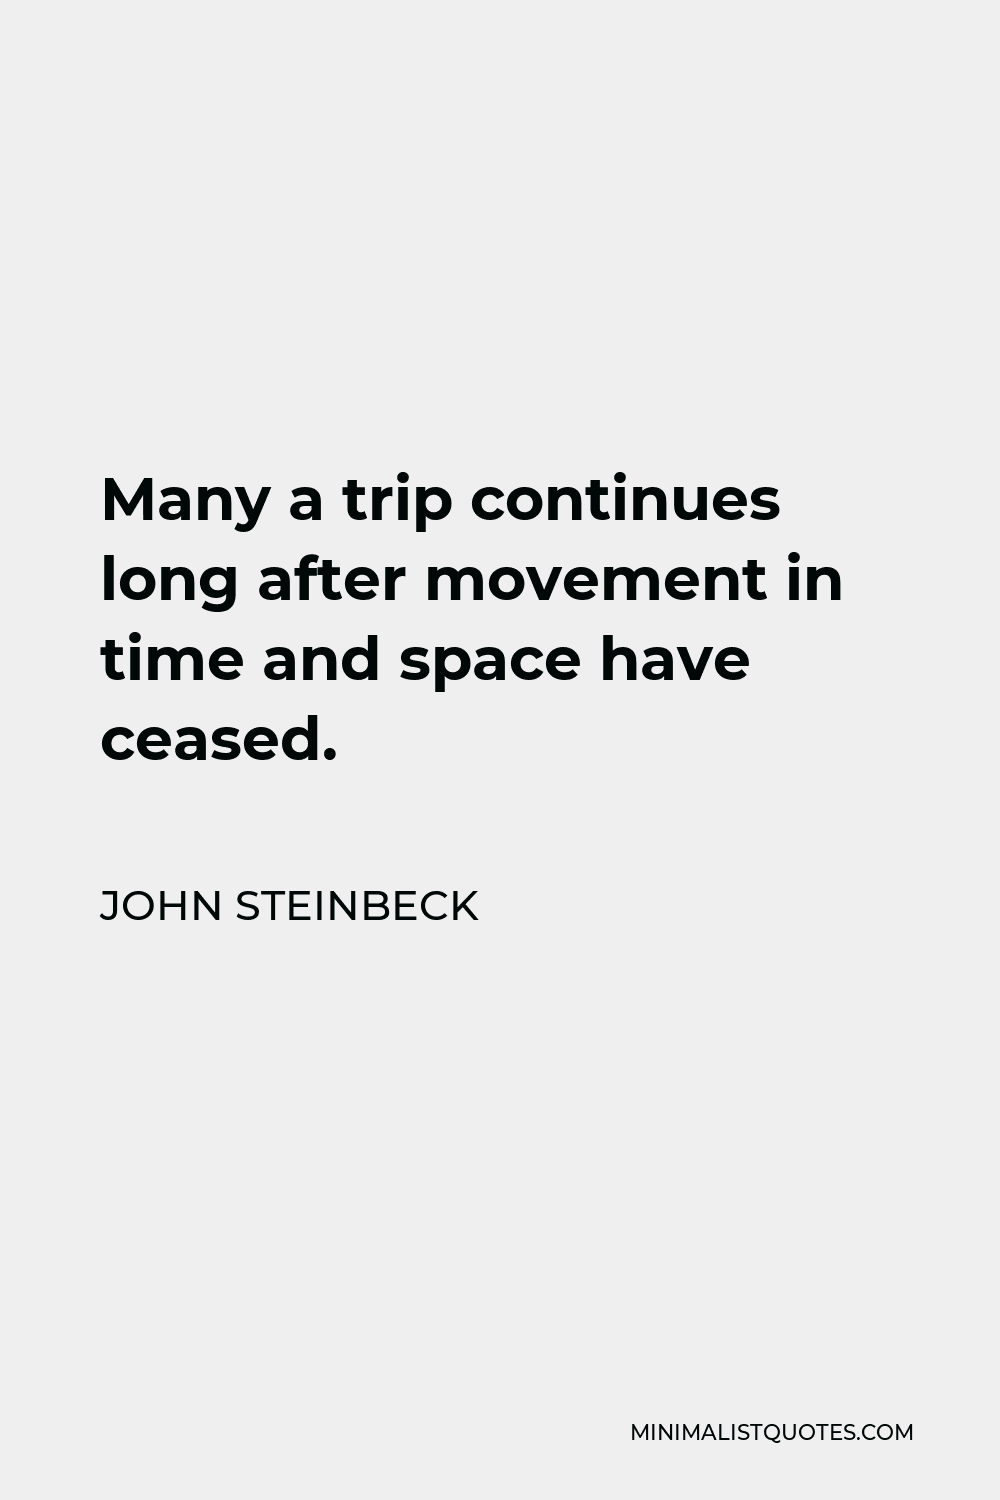 John Steinbeck Quote - Many a trip continues long after movement in time and space have ceased.